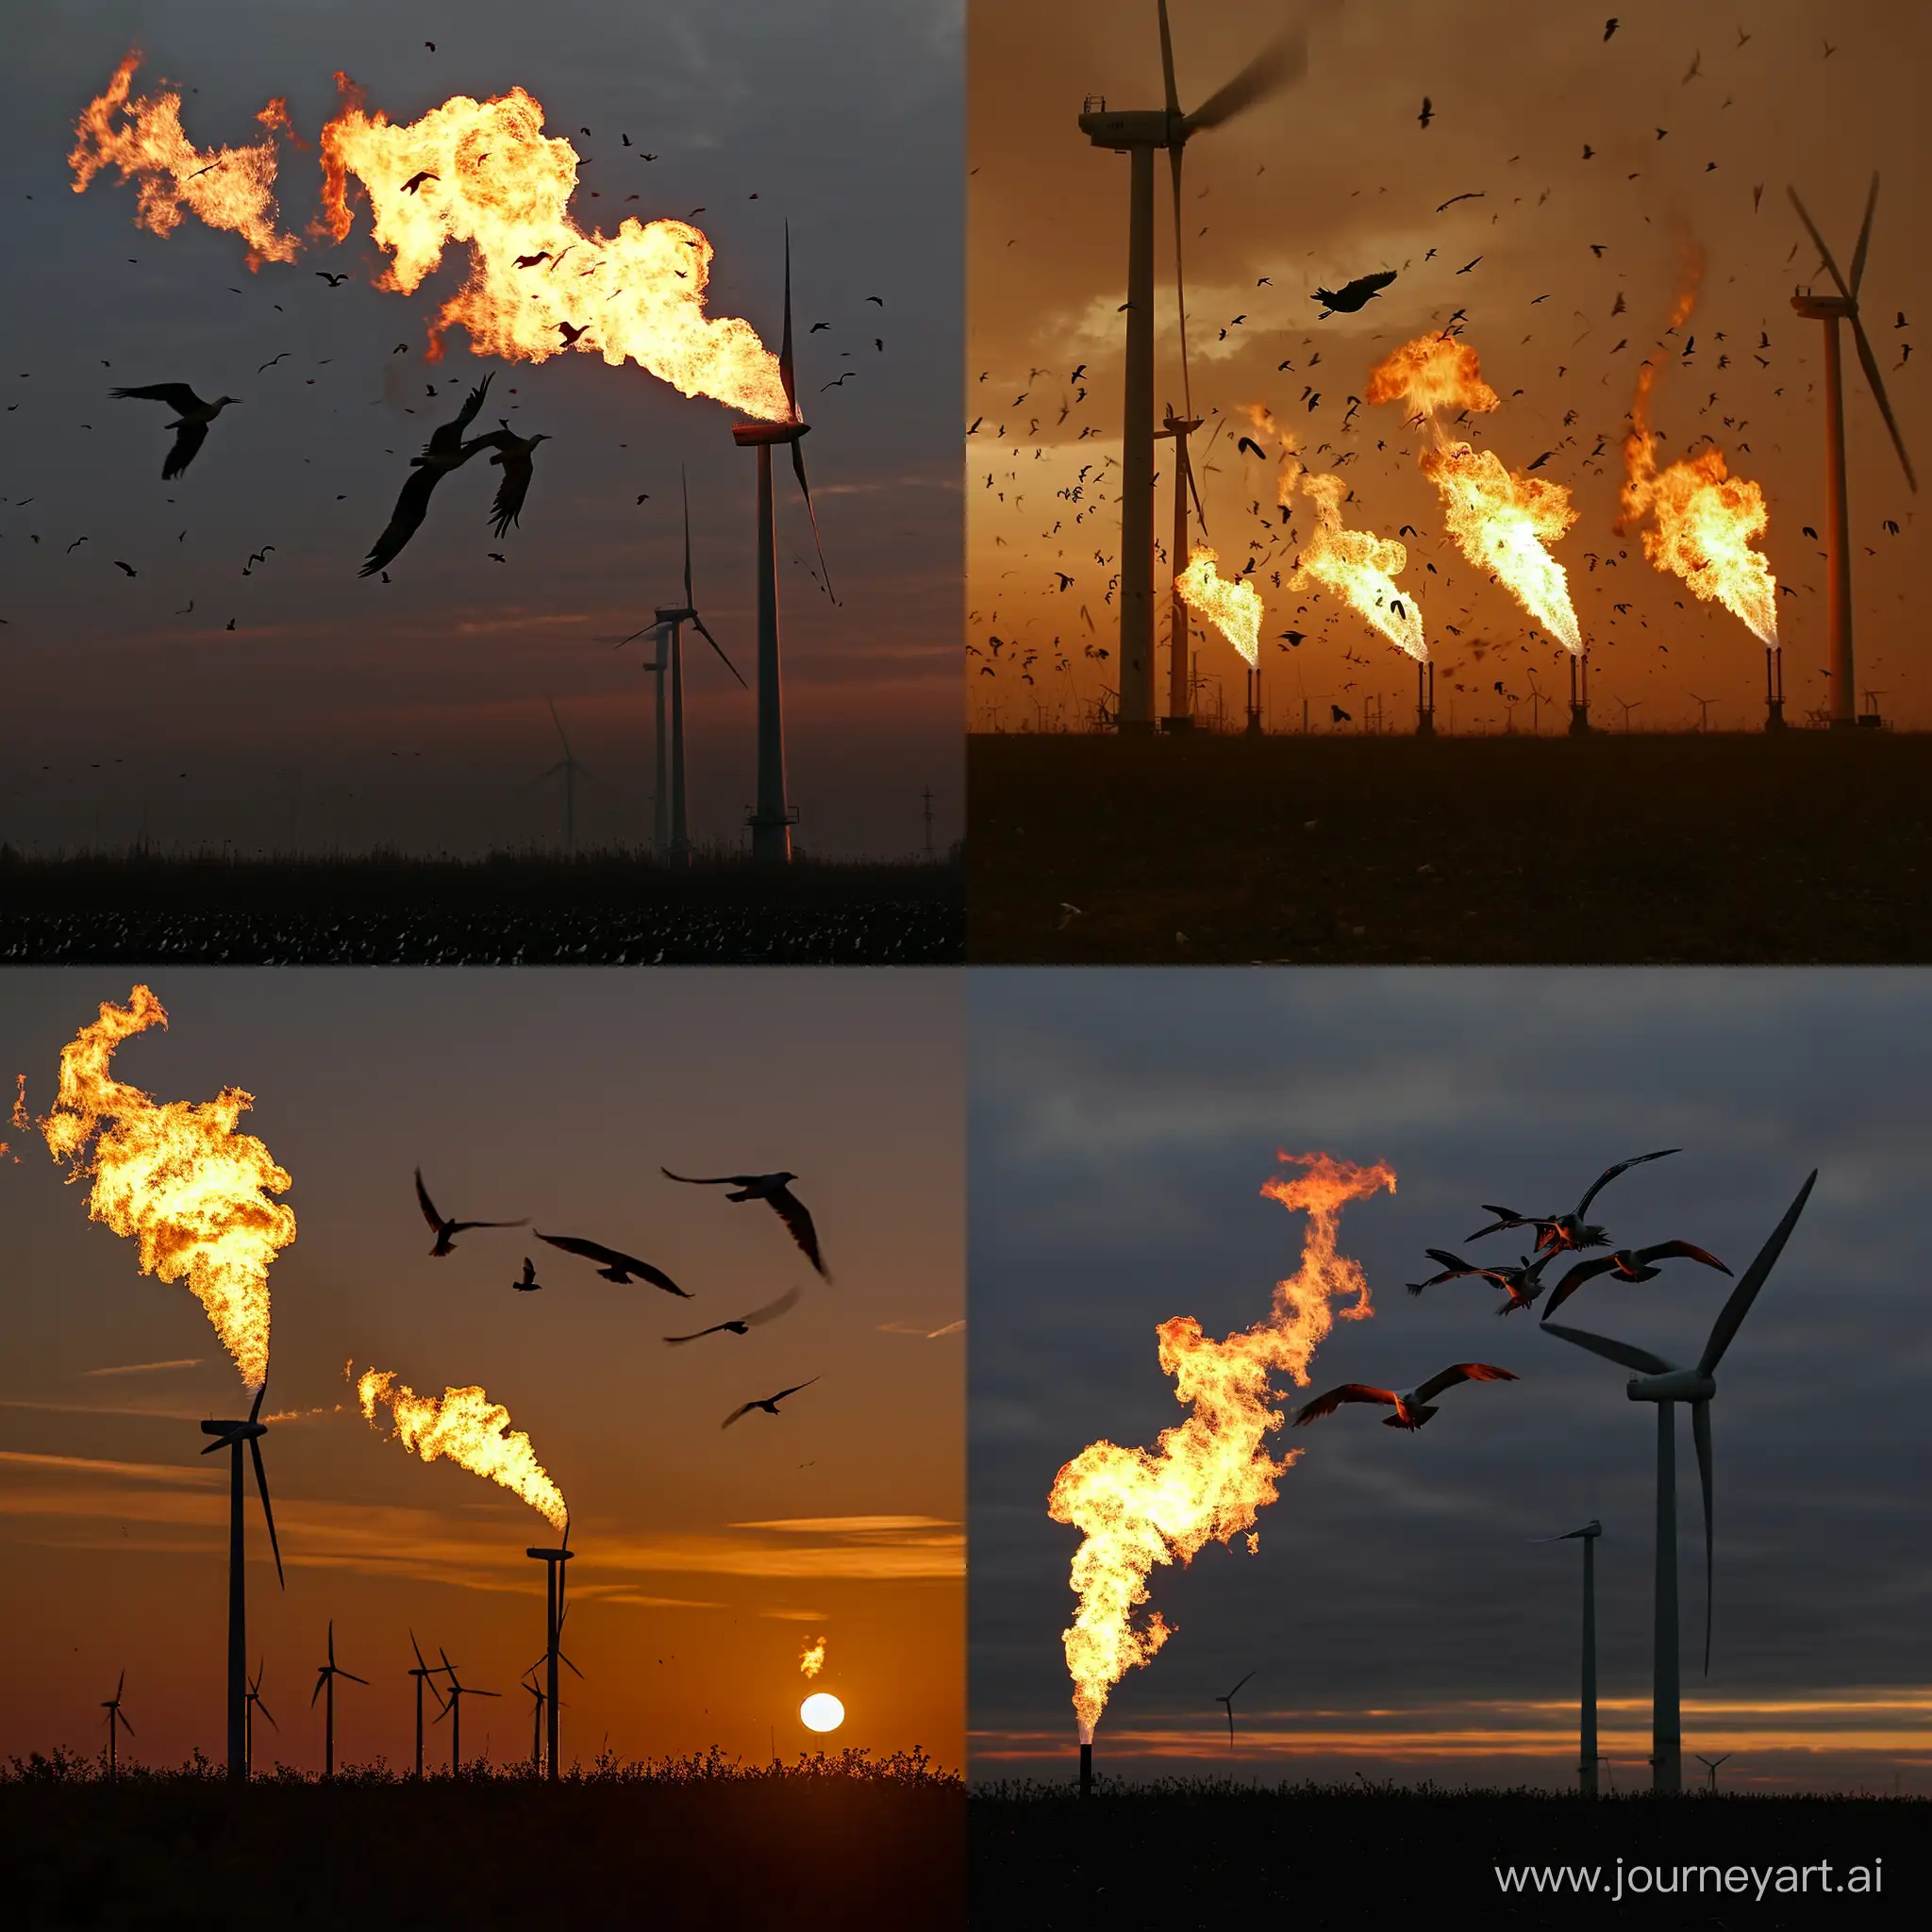 Graceful-Dance-of-Gas-Flares-and-Wind-Turbines-Amidst-Soaring-Birds